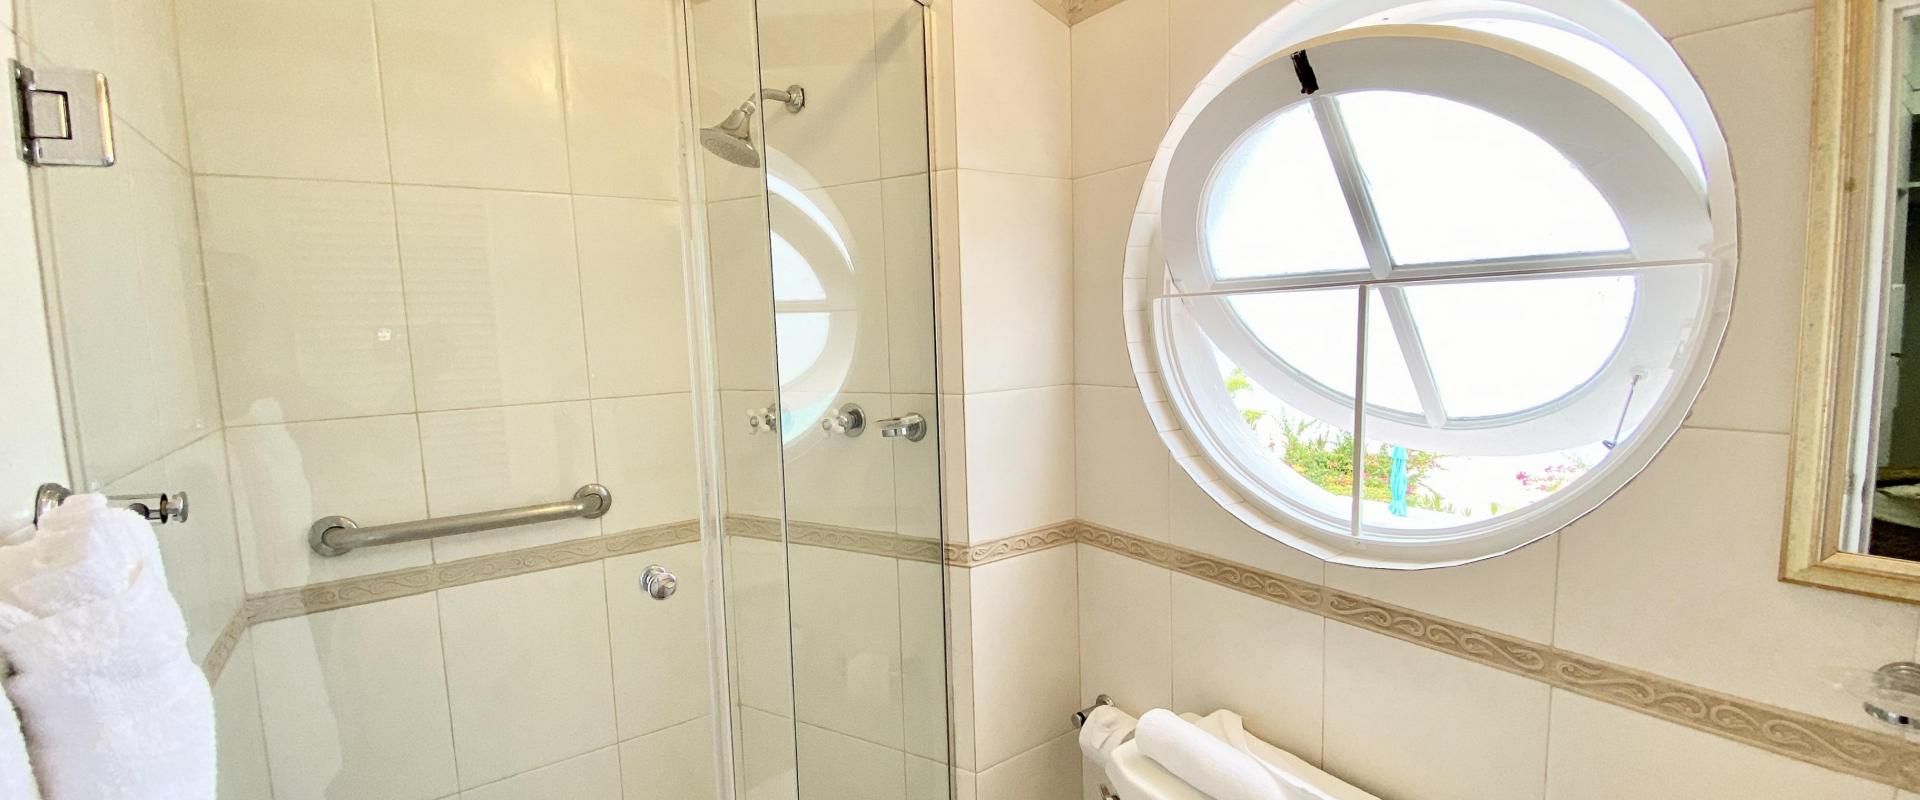 Fosters House Holiday Rental In Barbados Bathroom 4